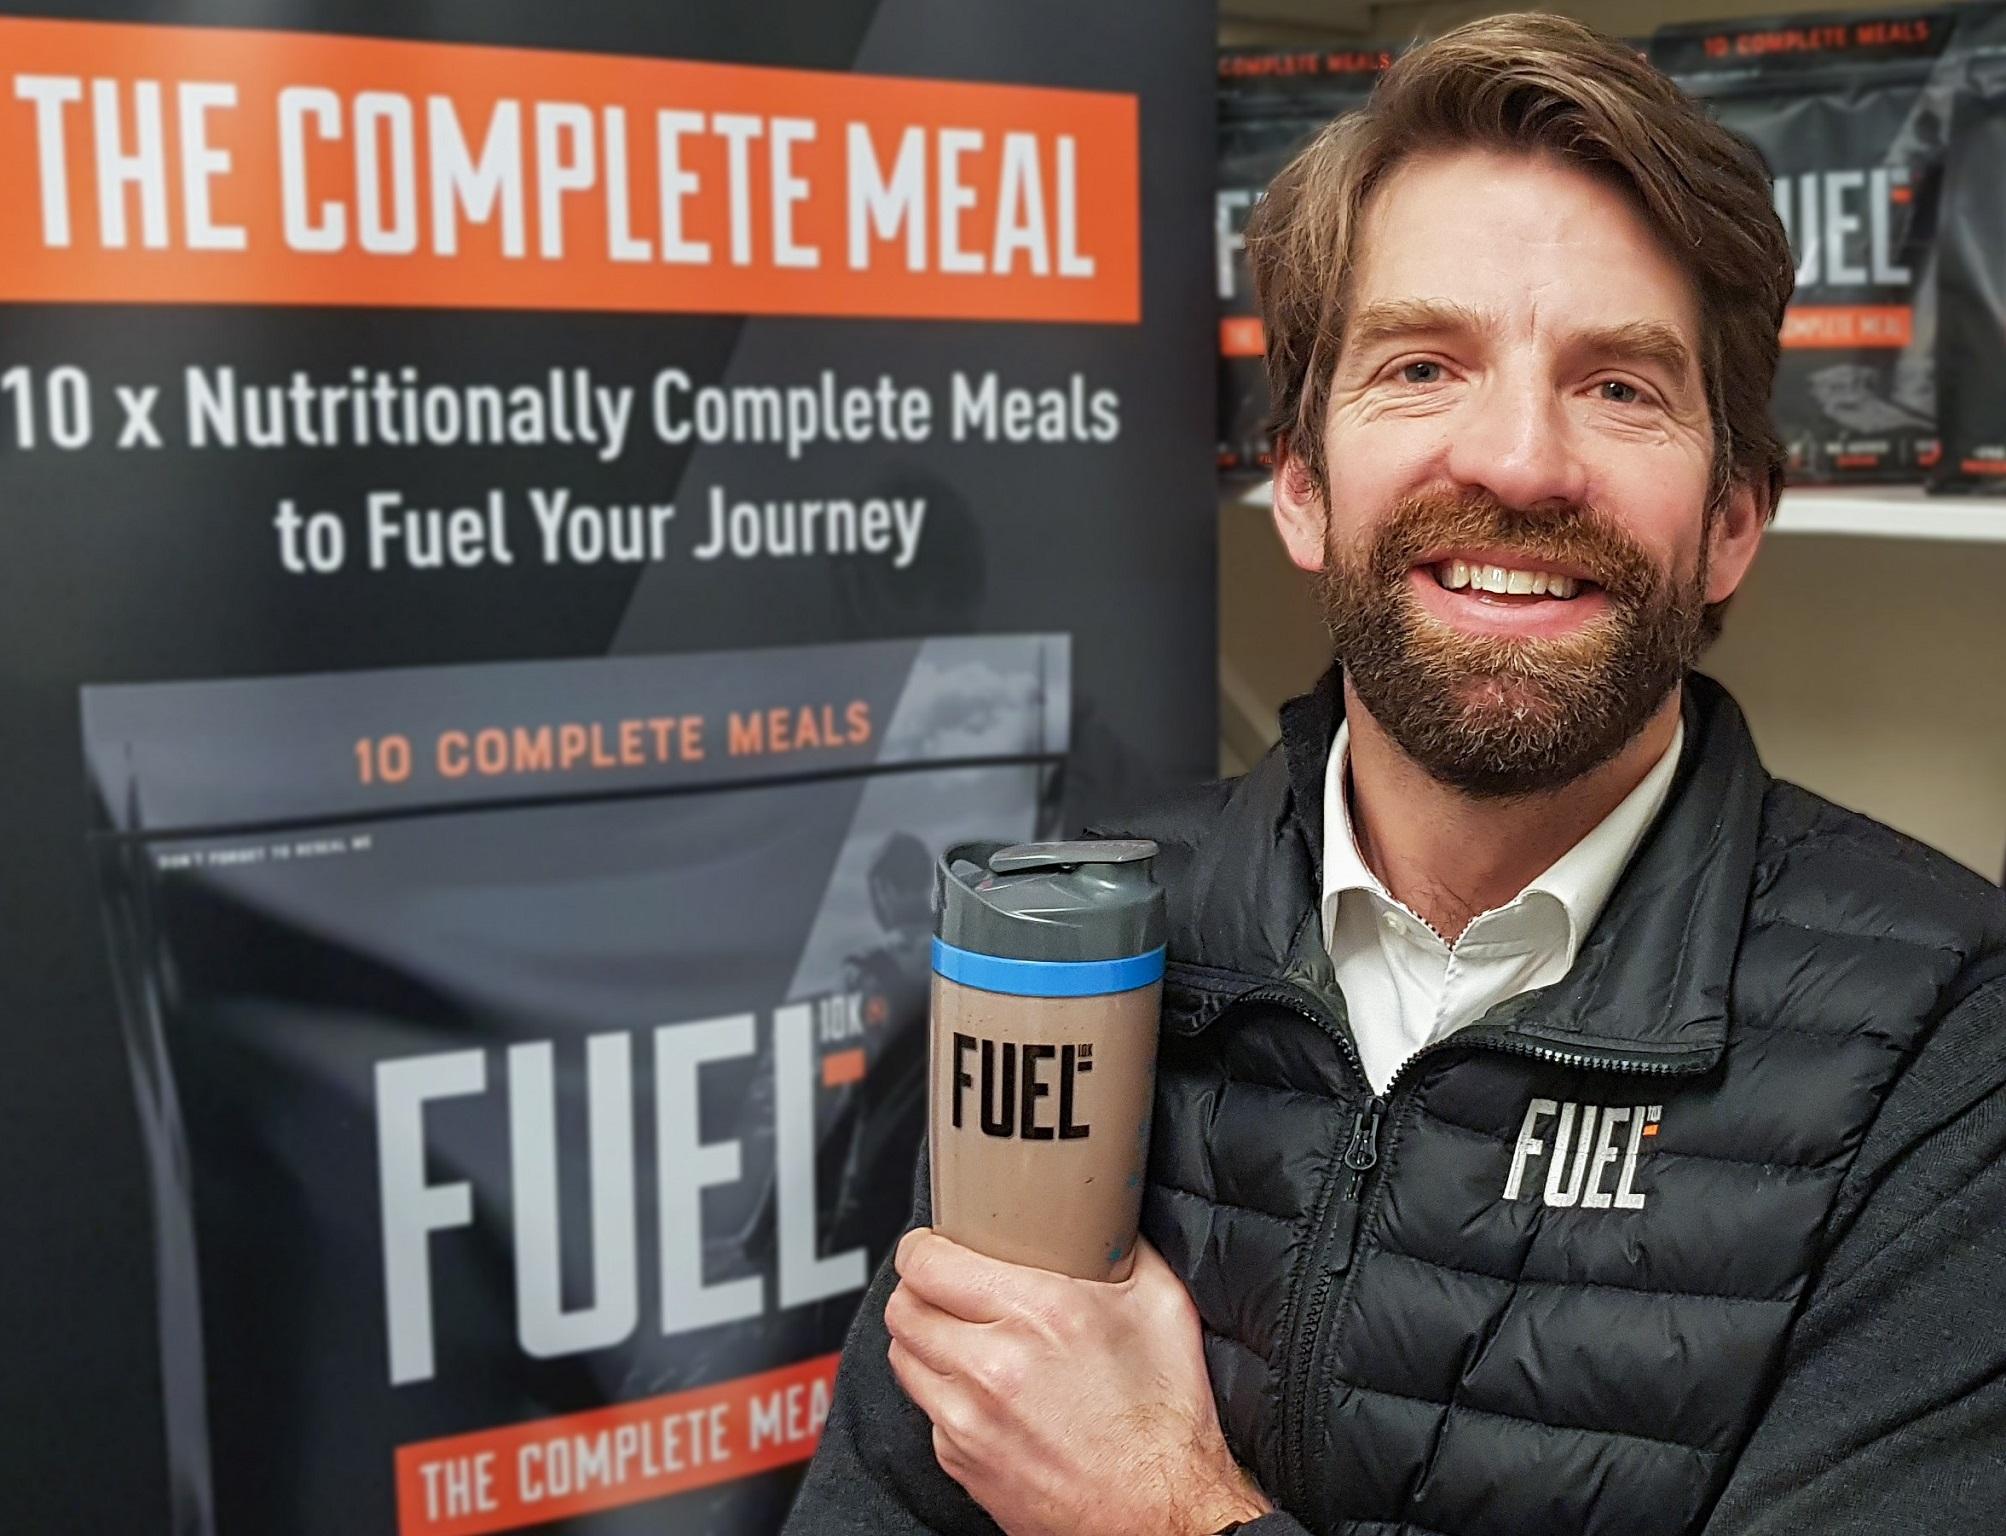 In 2015 former Royal Scots Dragoon Guard Alex Matheson set up a breakfast cereal business called FUEL10K